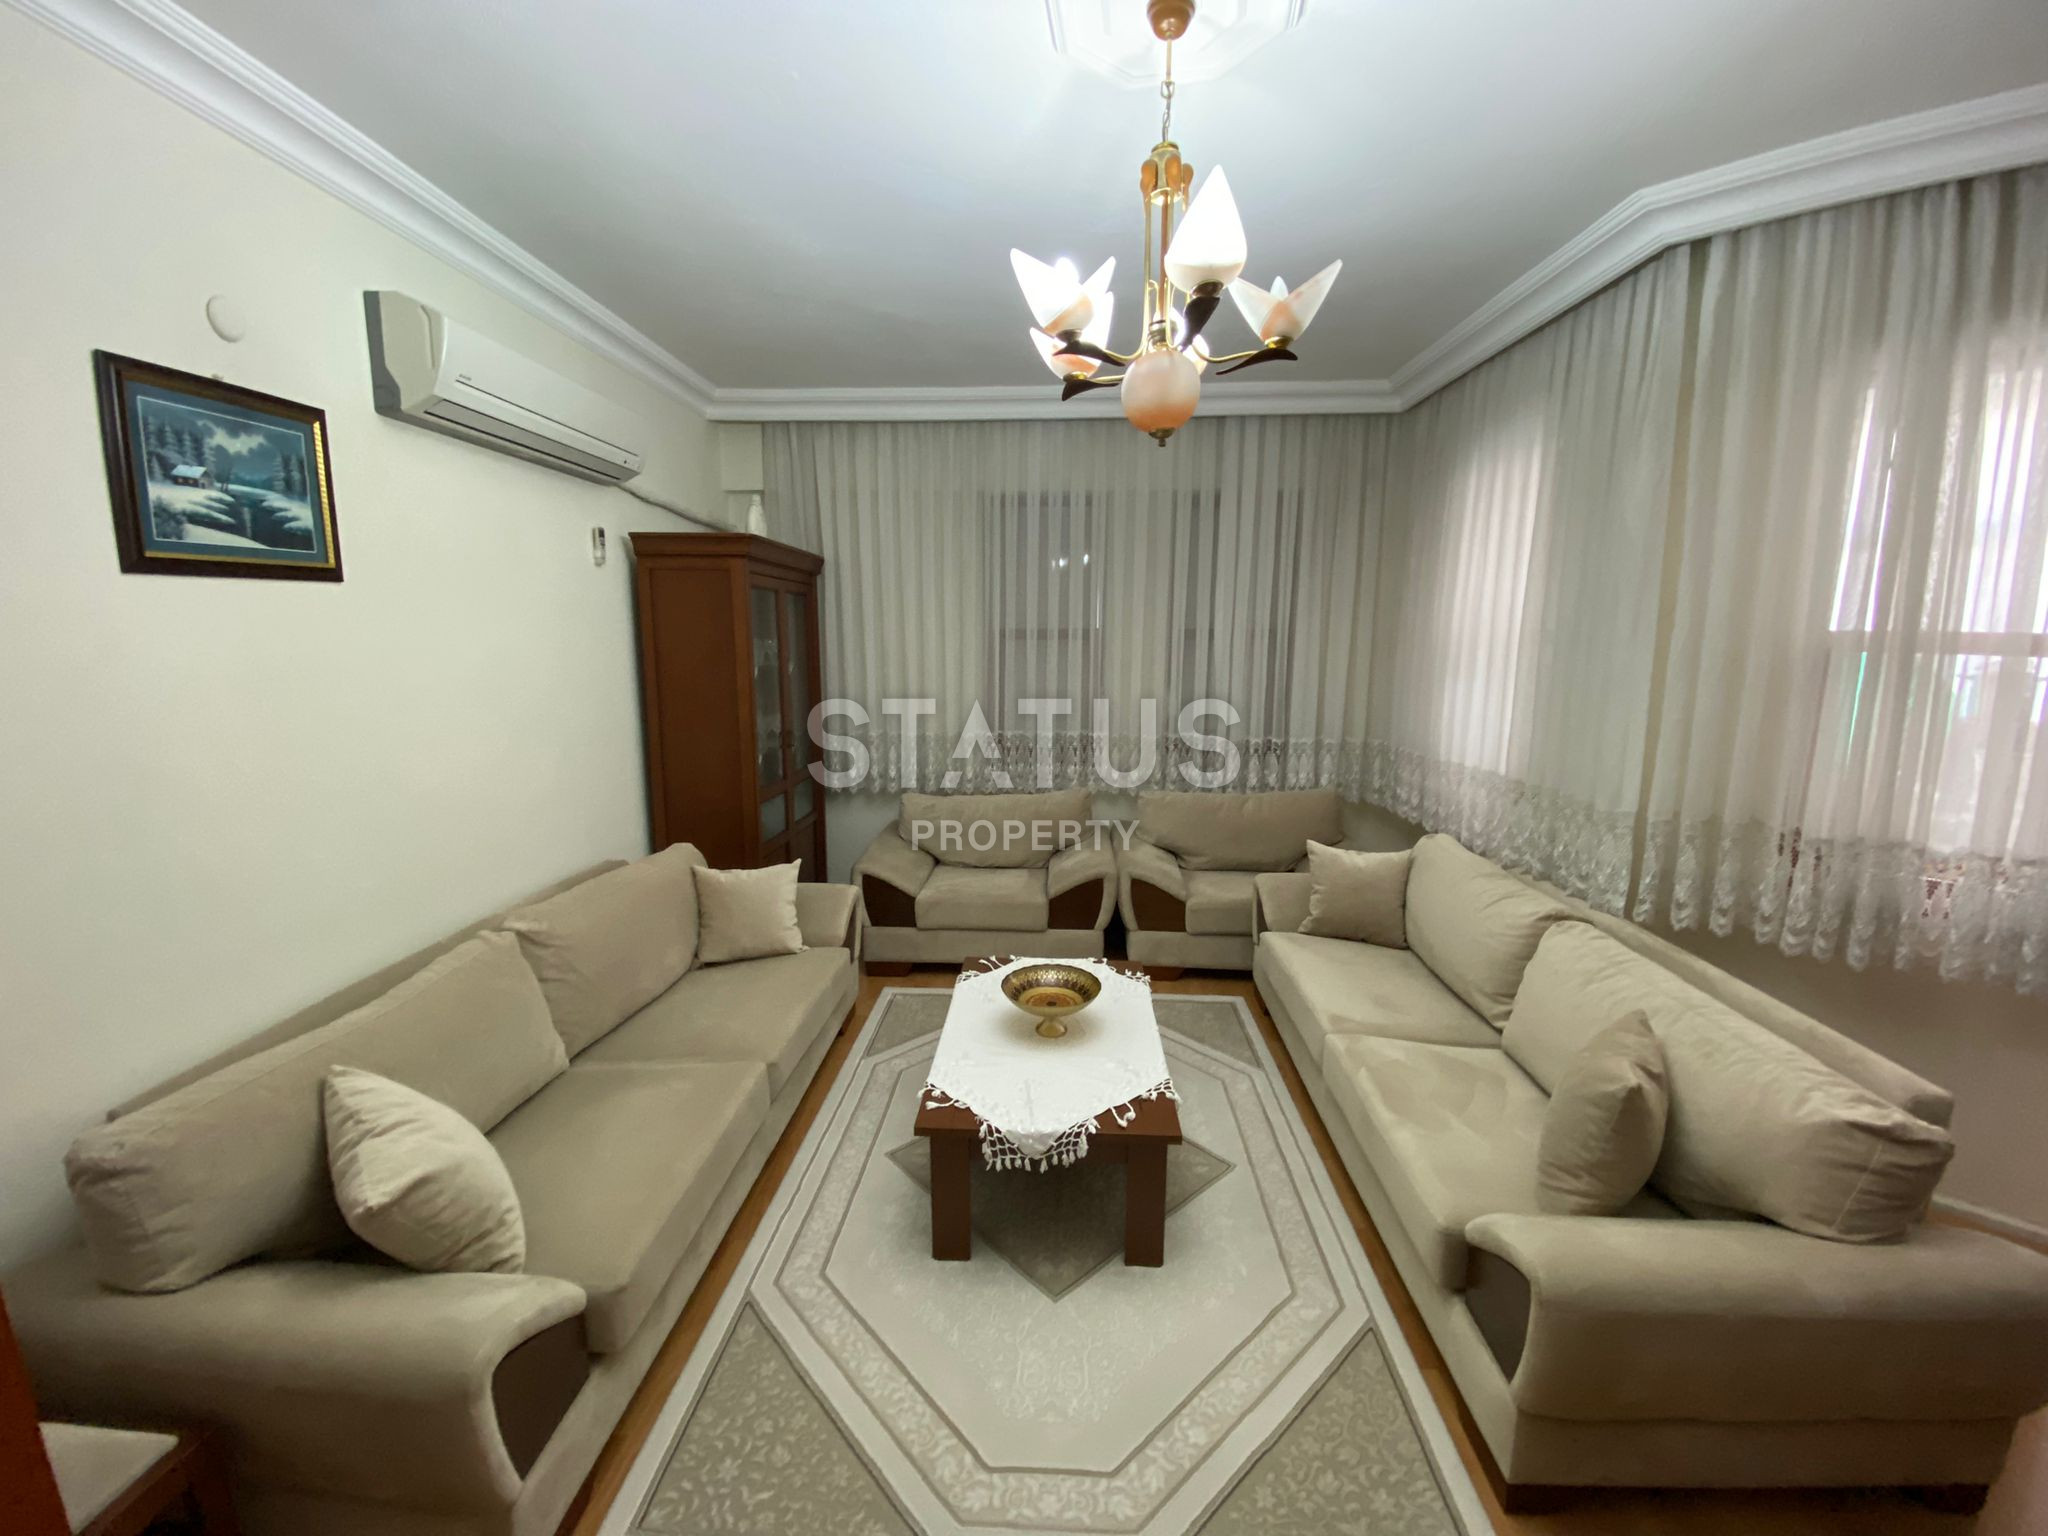 Spacious apartment with 3 bedrooms, 1 km from the sea in the center of Alanya, Hajet district. 140m2 фото 2